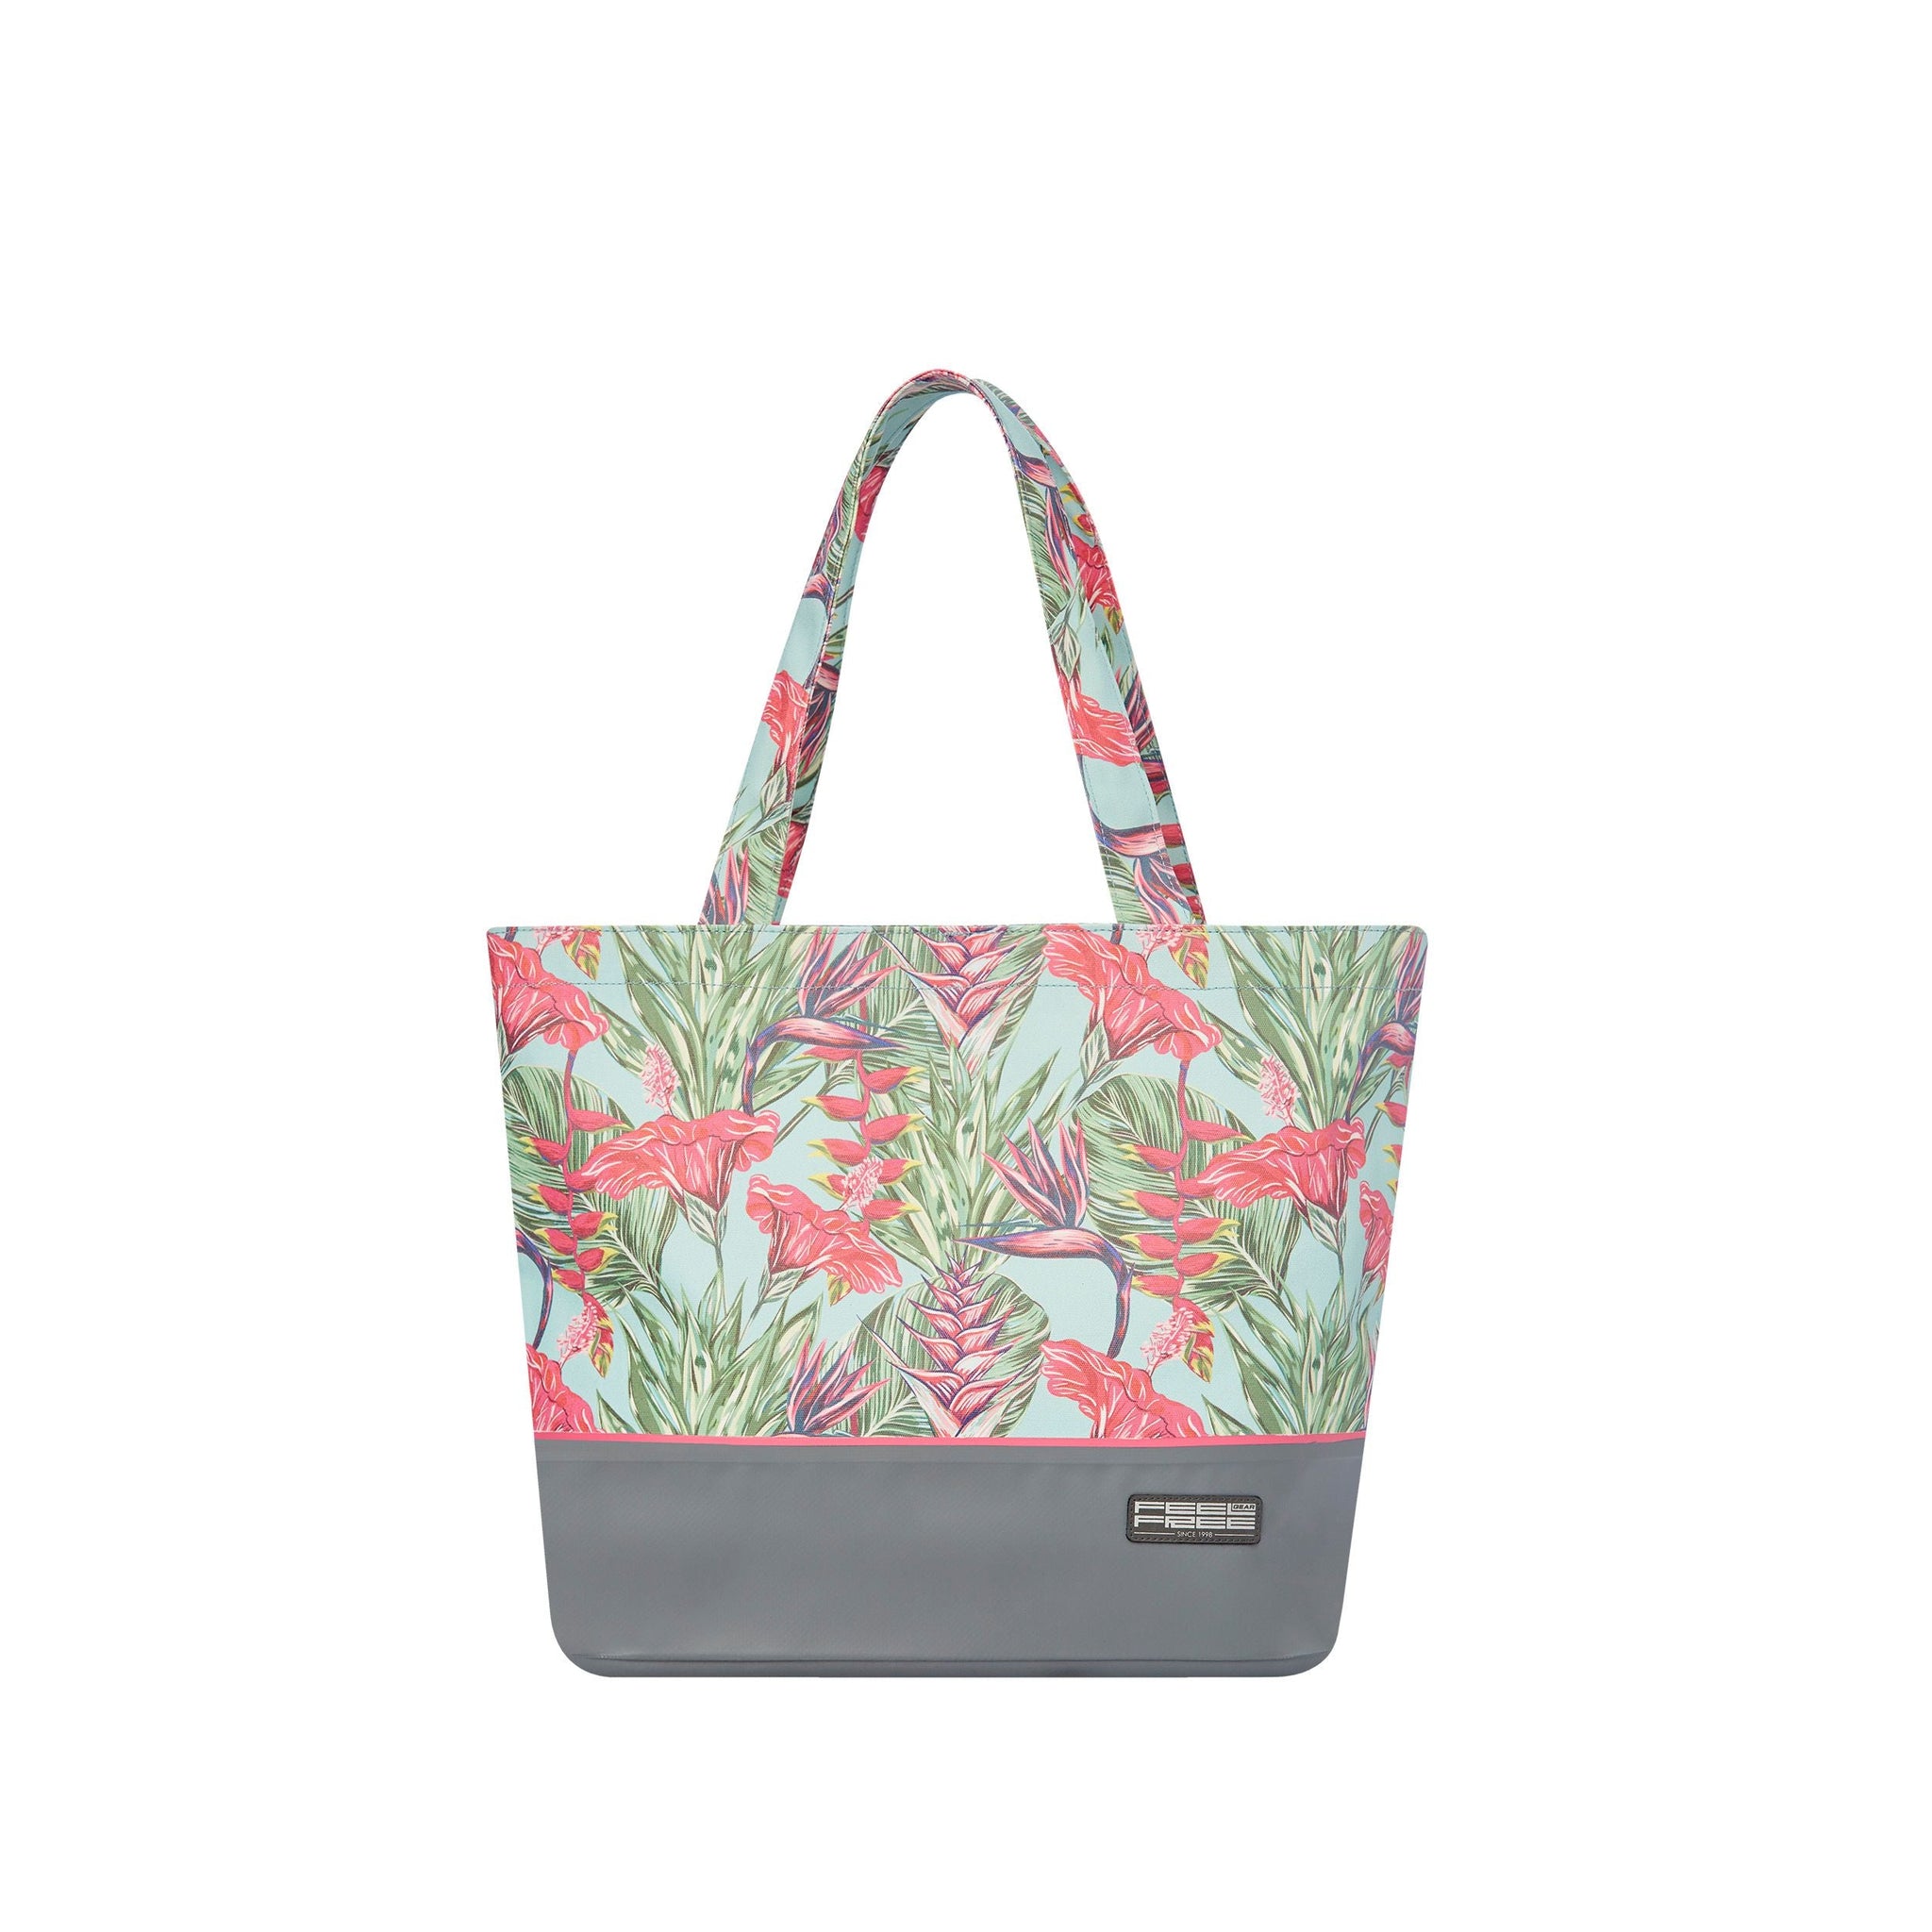 Tropical Waterproof Beach Tote and Canvas Bag